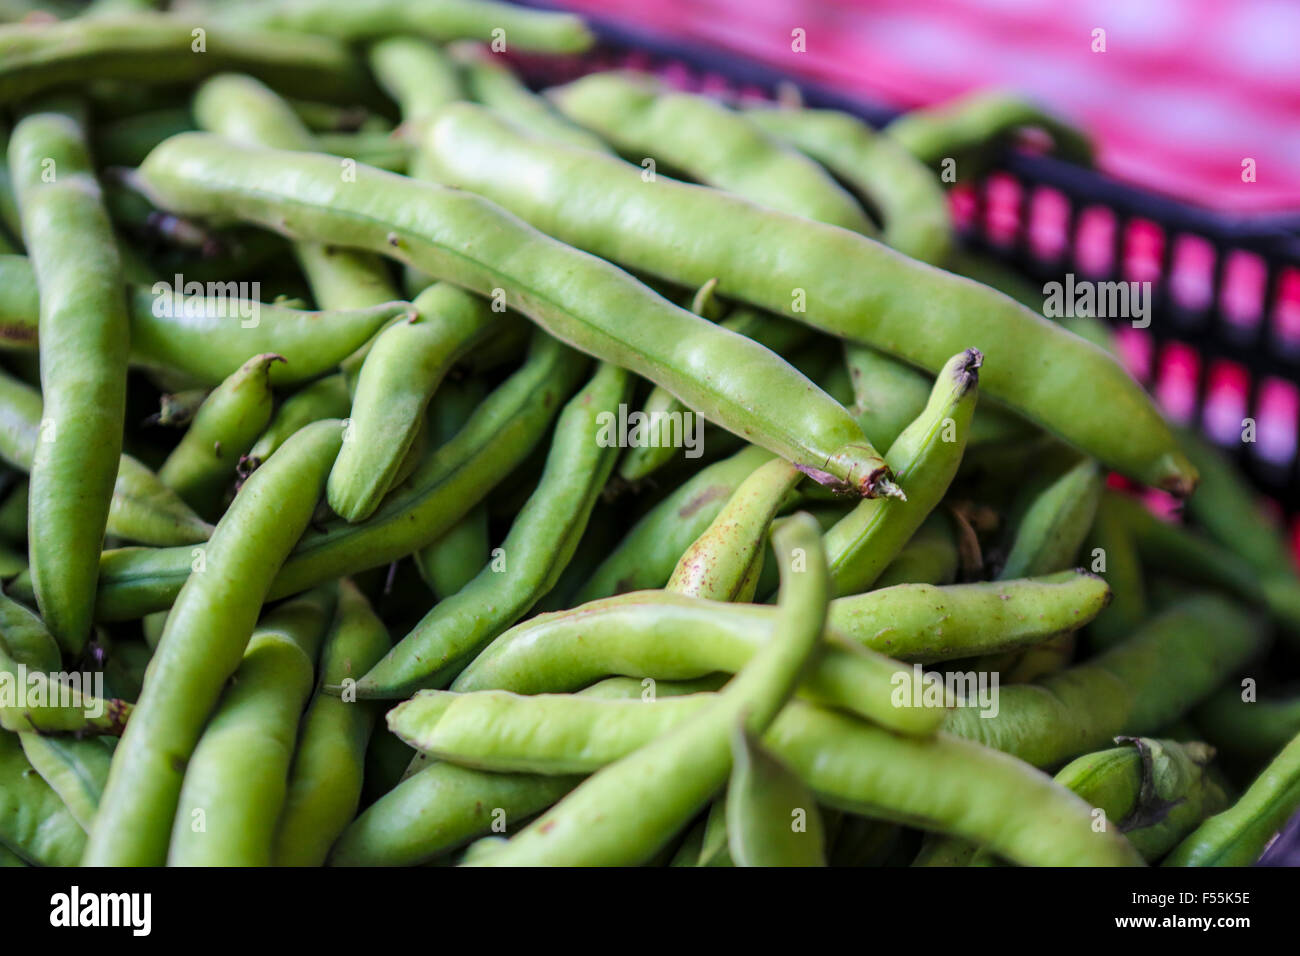 Raw Green beans in pod Stock Photo